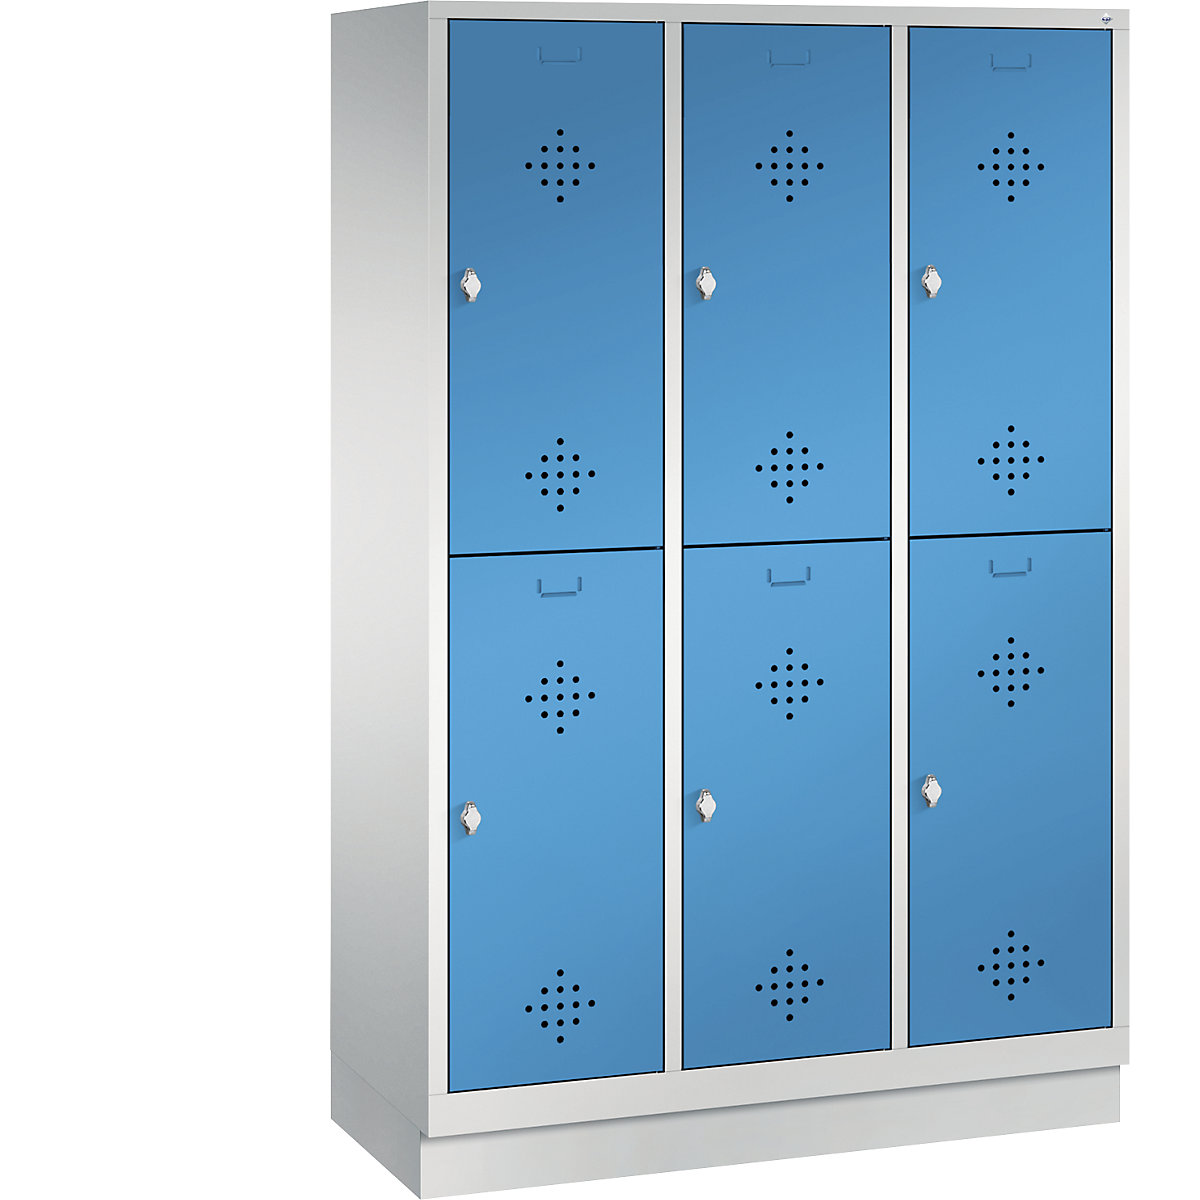 CLASSIC cloakroom locker with plinth, double tier – C+P, 3 compartments, 2 shelf compartments each, compartment width 400 mm, light grey / light blue-11